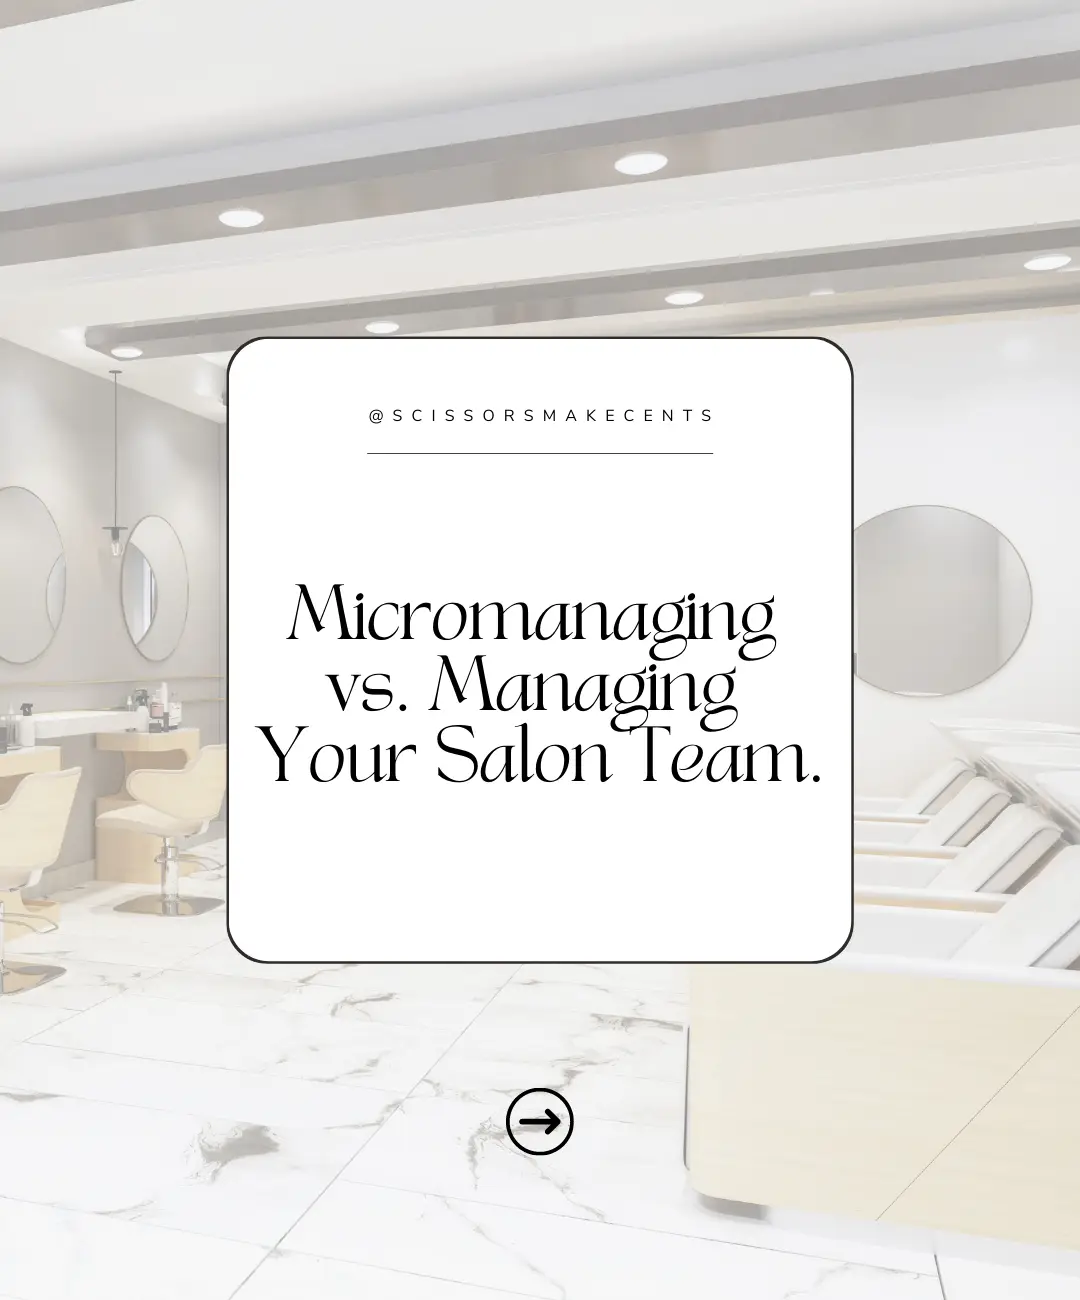 7 Foiling and Maintenance Tips for Successful Stylists - Fantastic